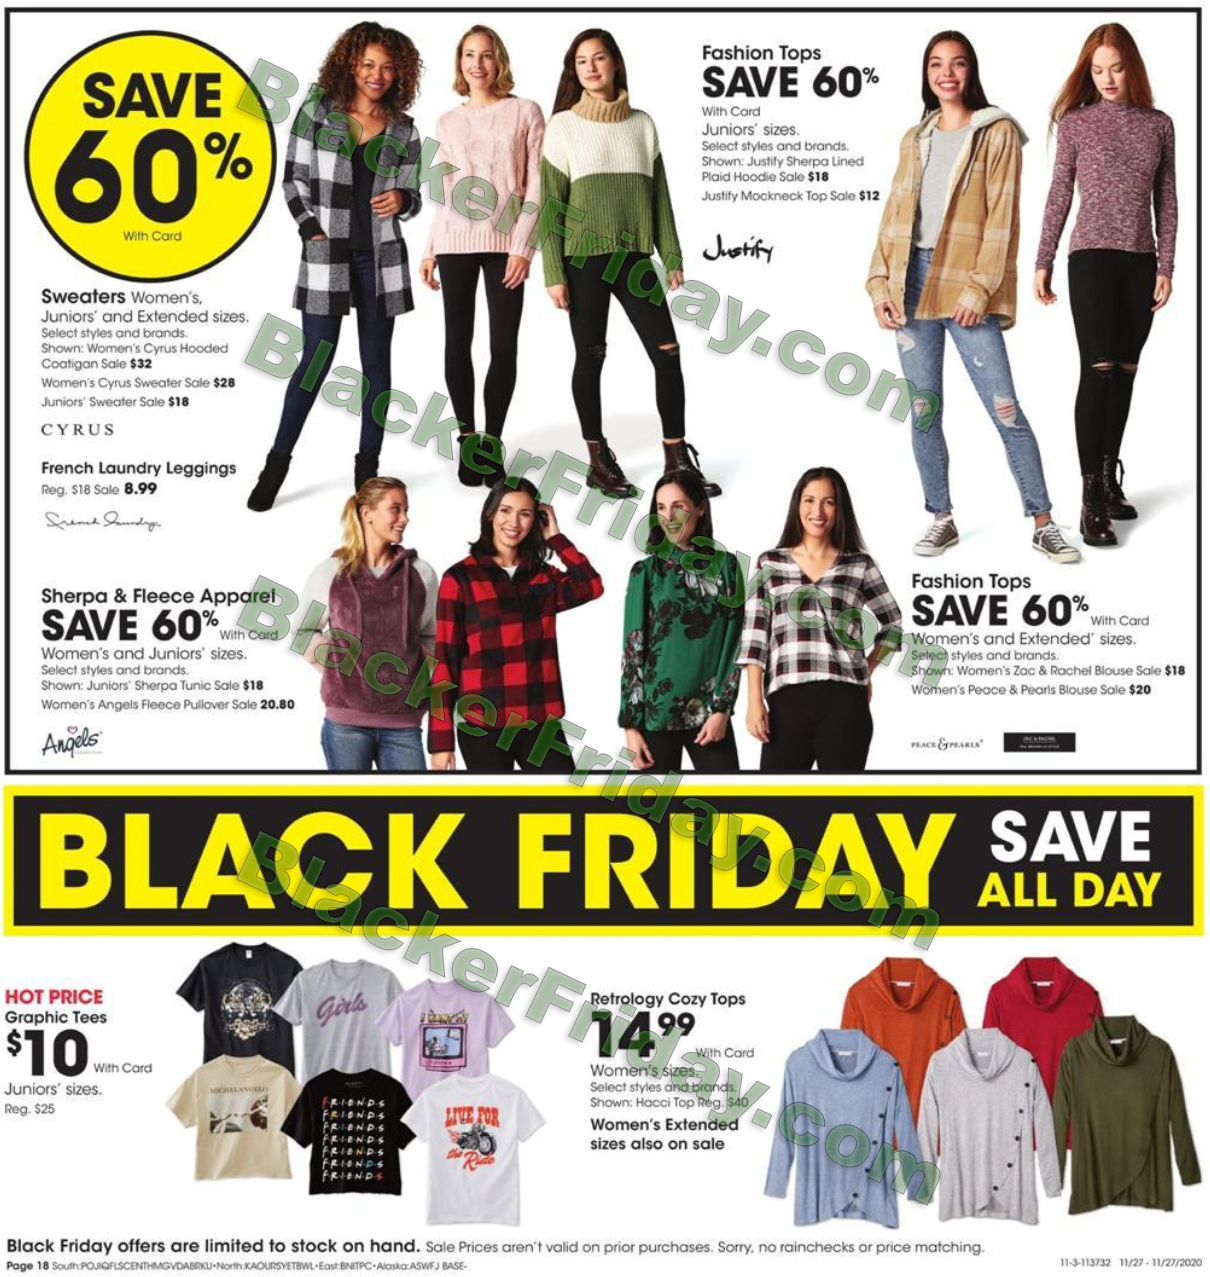 Fred Meyer Black Friday 2021 Sale What to Expect Blacker Friday